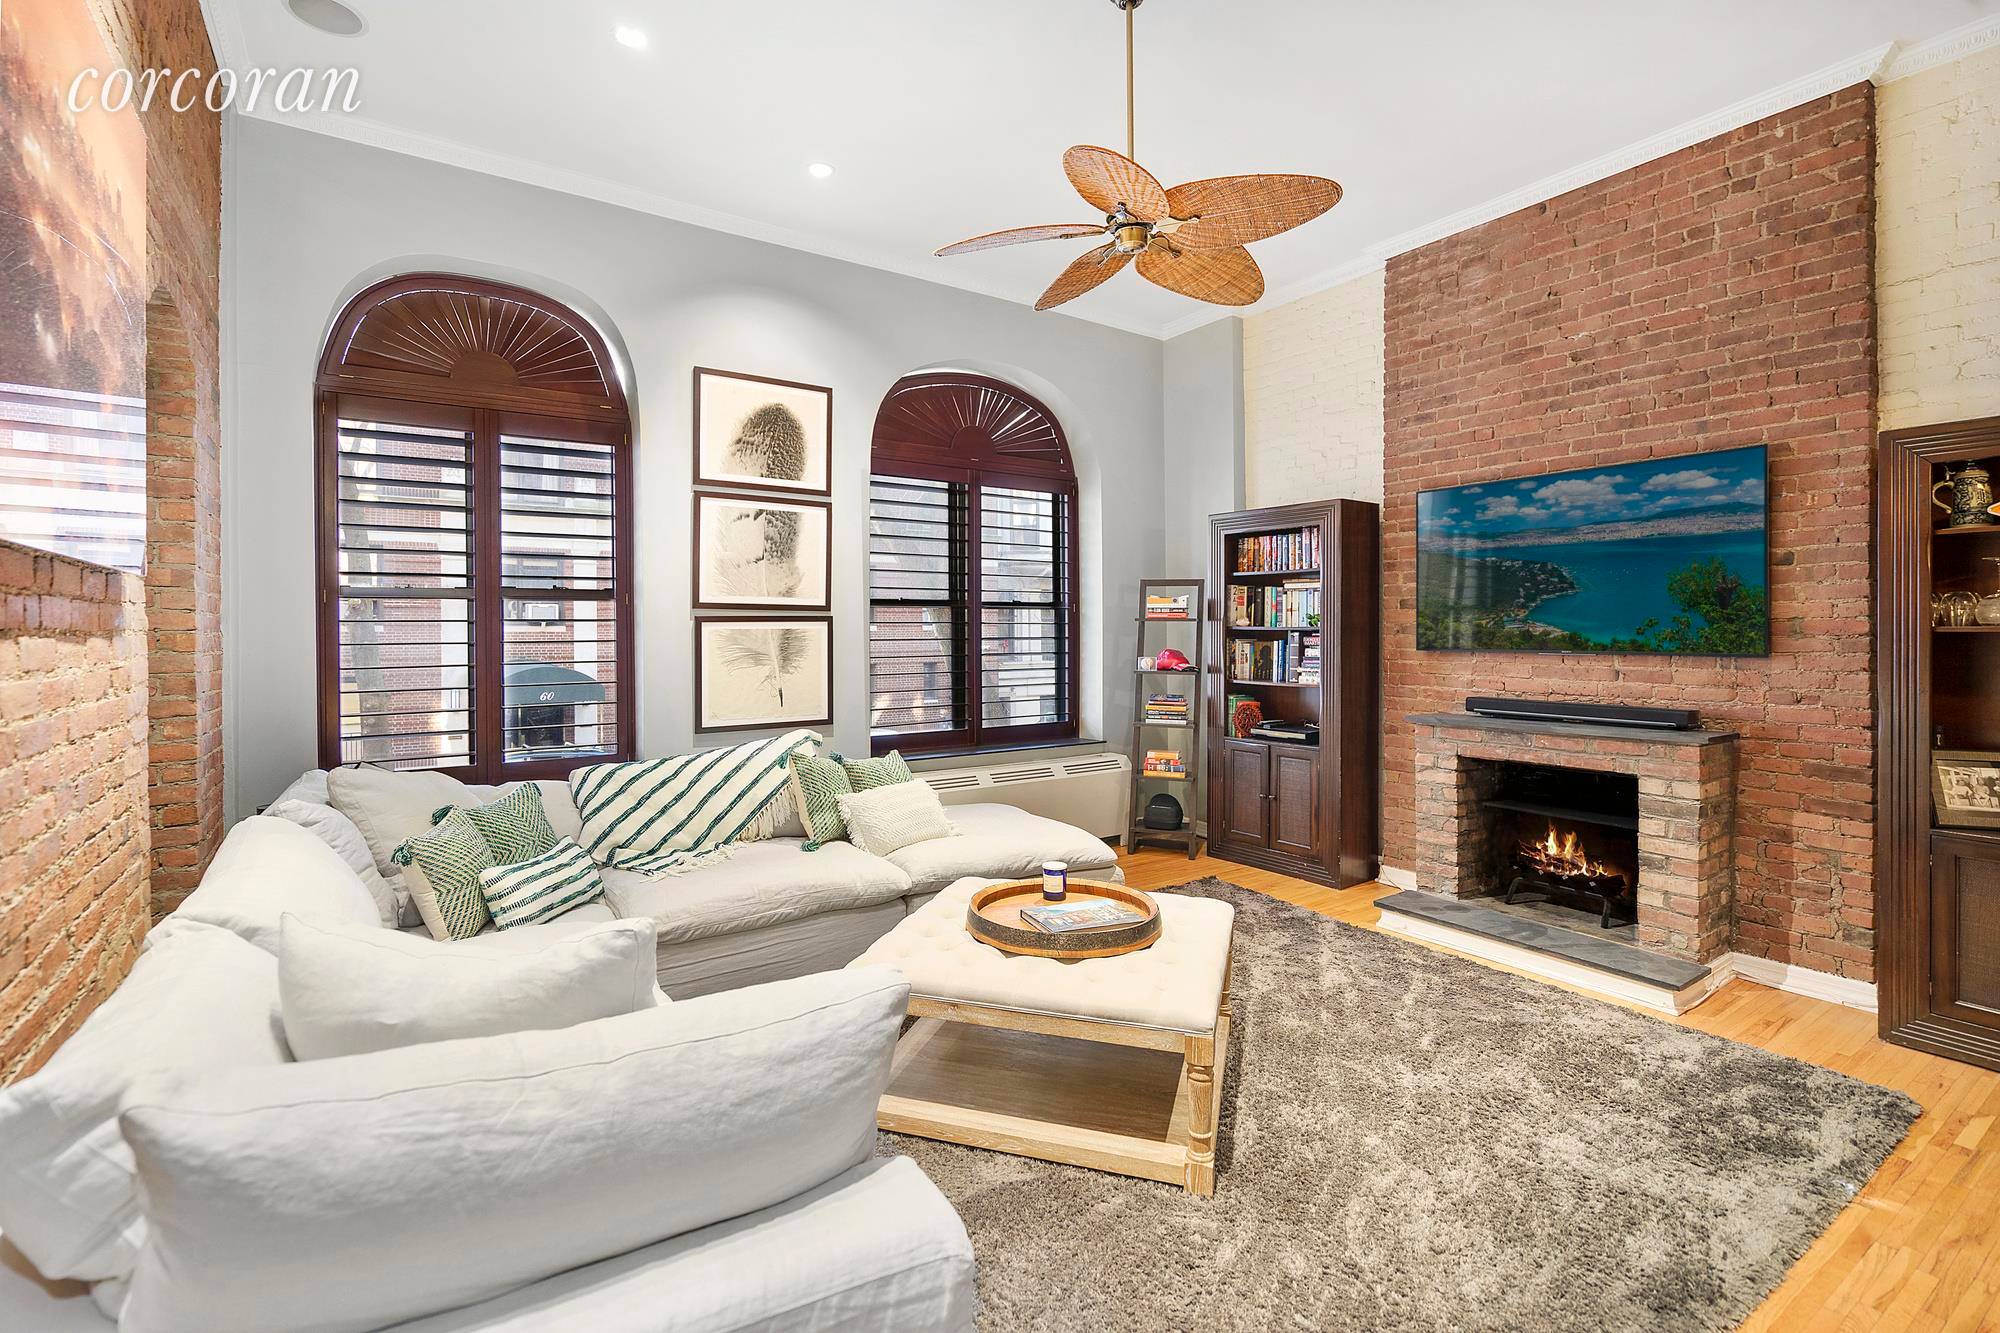 61 West 68th Street is a double wide Brownstone located on a prestigious Central Park block.